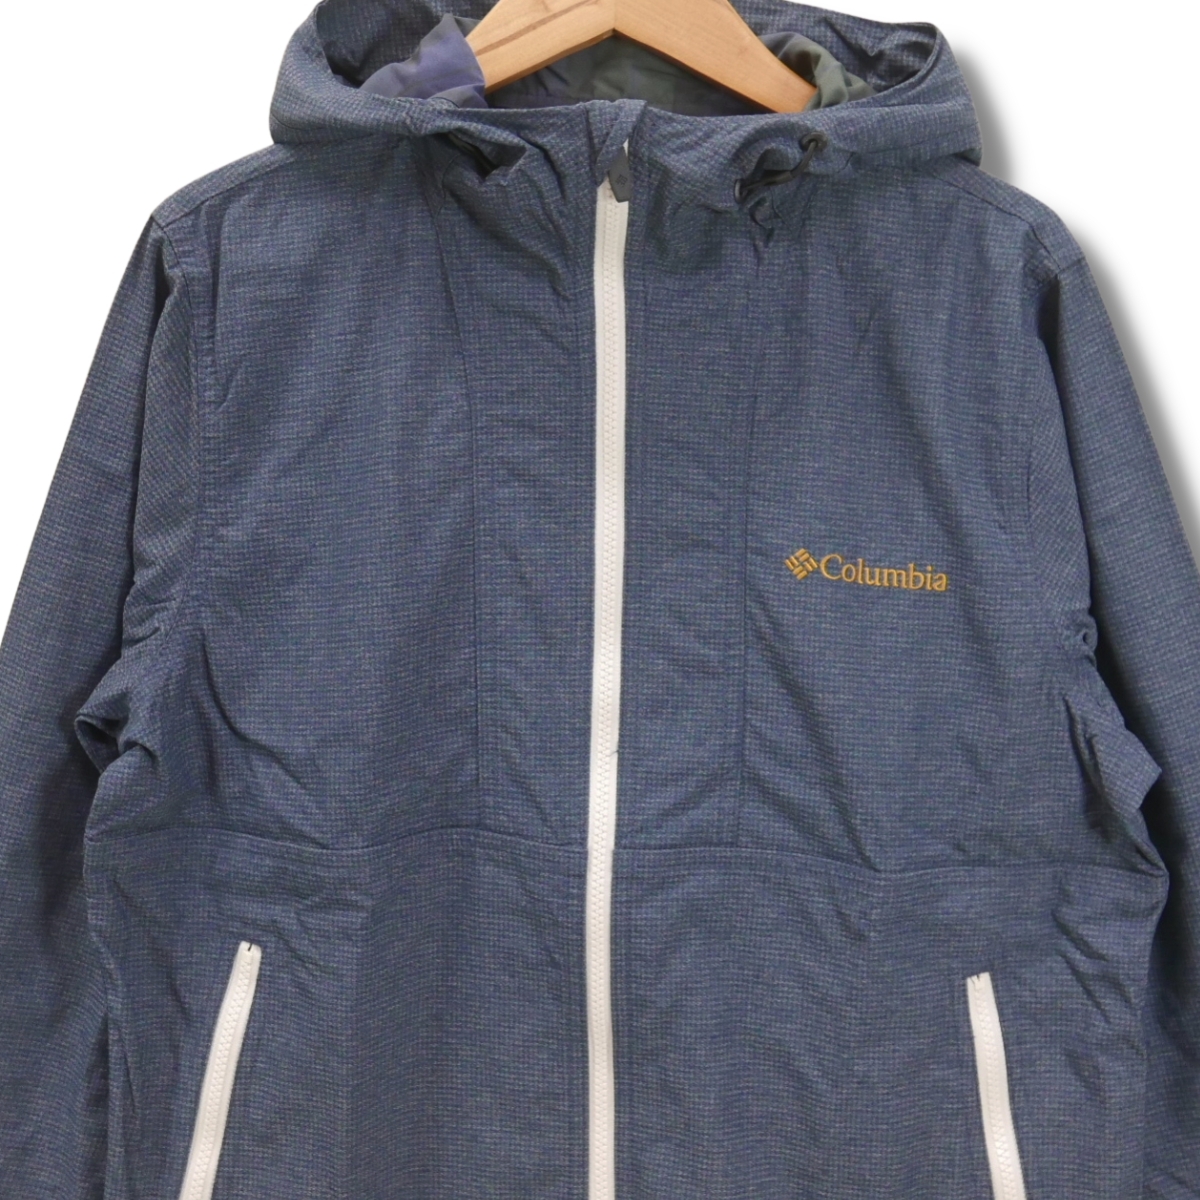  prompt decision * Colombia he before window jacket CNH/S size free shipping thousand bird .. window jacket water-repellent . manner compact usually use OK